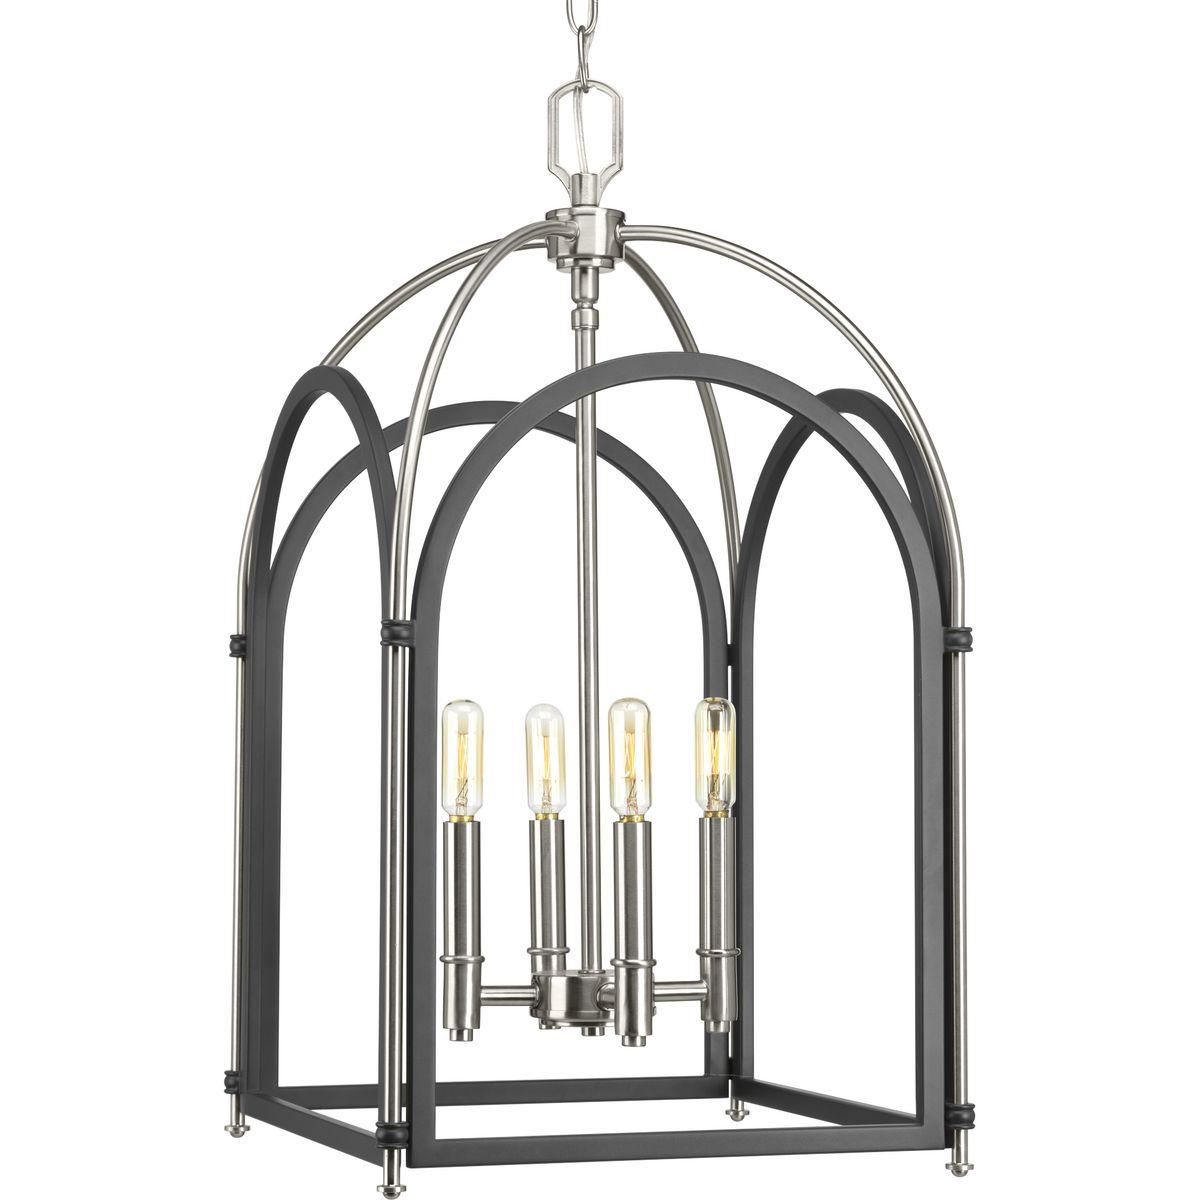 Hubbell P500039-143 Westfall is a distinctive combination of arching elements that create a dramatic soaring frame. A dual-tone finish of Graphite with Brushed Nickel highlights the distinctive form and provides rich contrasting surround for a classic candelabra cluster. Met